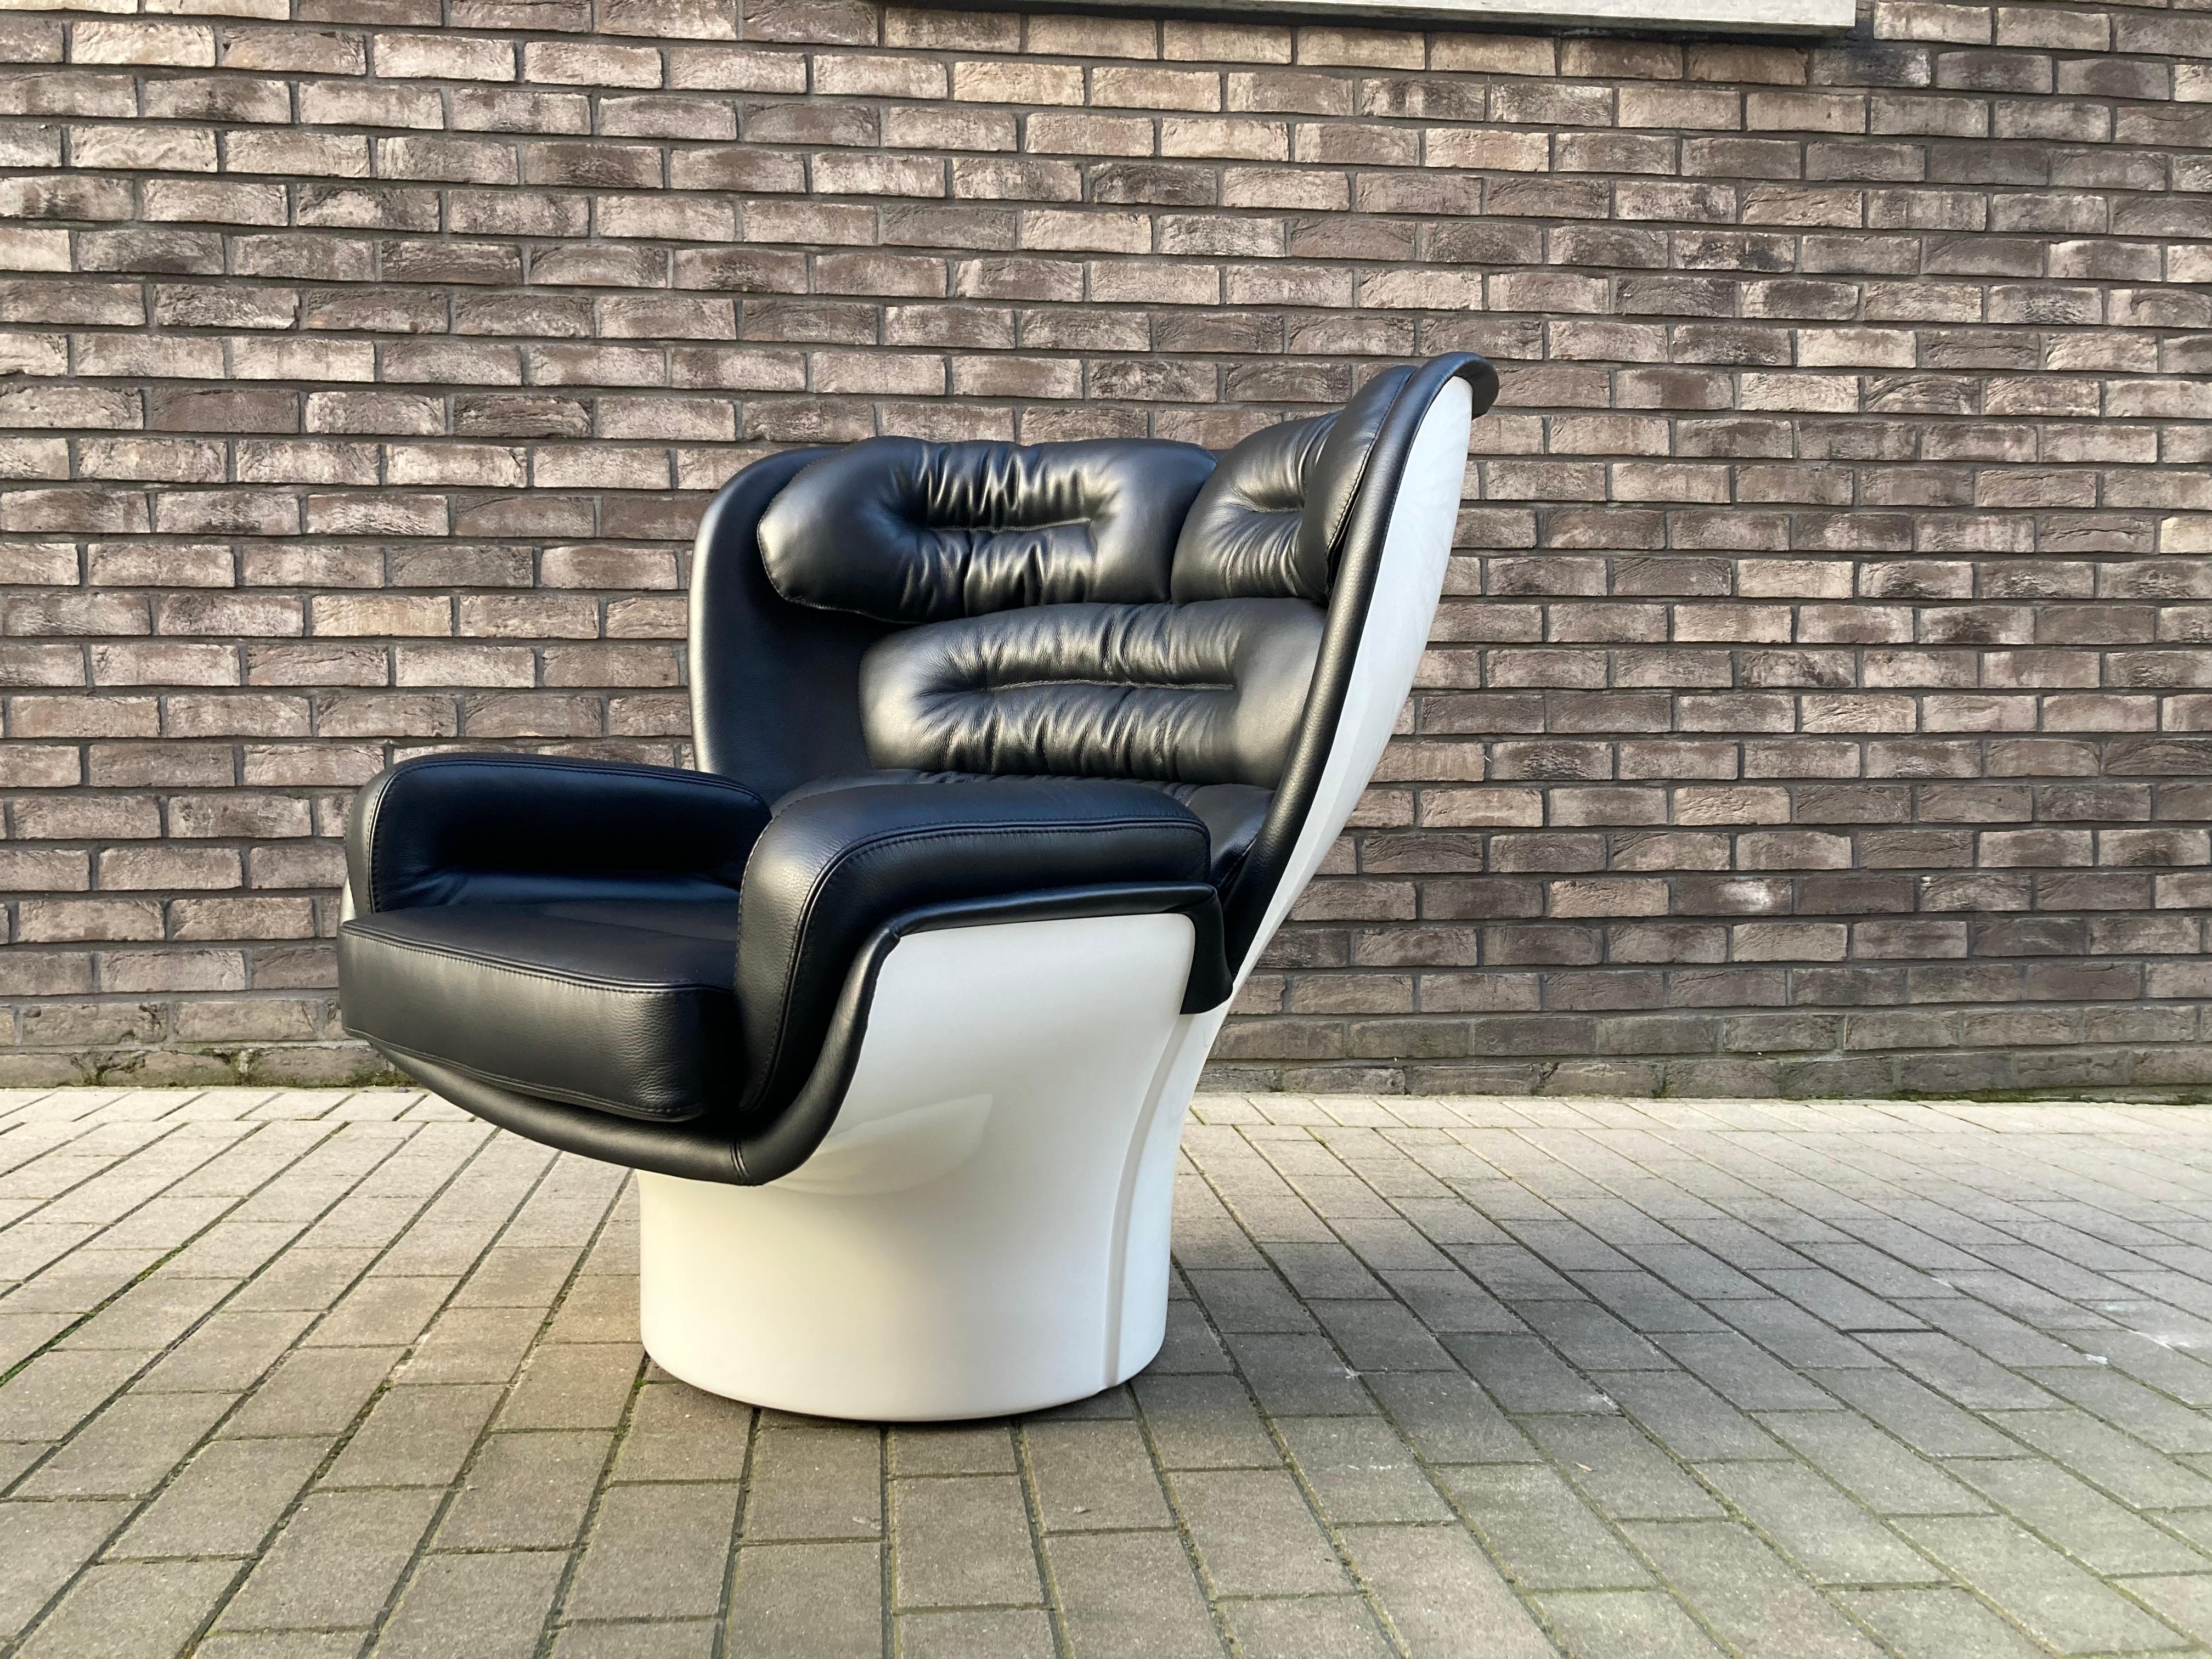 Showroom model in impeccable NEW condition!
Iconic Space Age classic: Elda Chair by Joe Colombo (1963- Italy).
360 degree rotatable base (swivel).

With certificate of authenticity and warranty!

Black leather with a beautiful grain of the highest